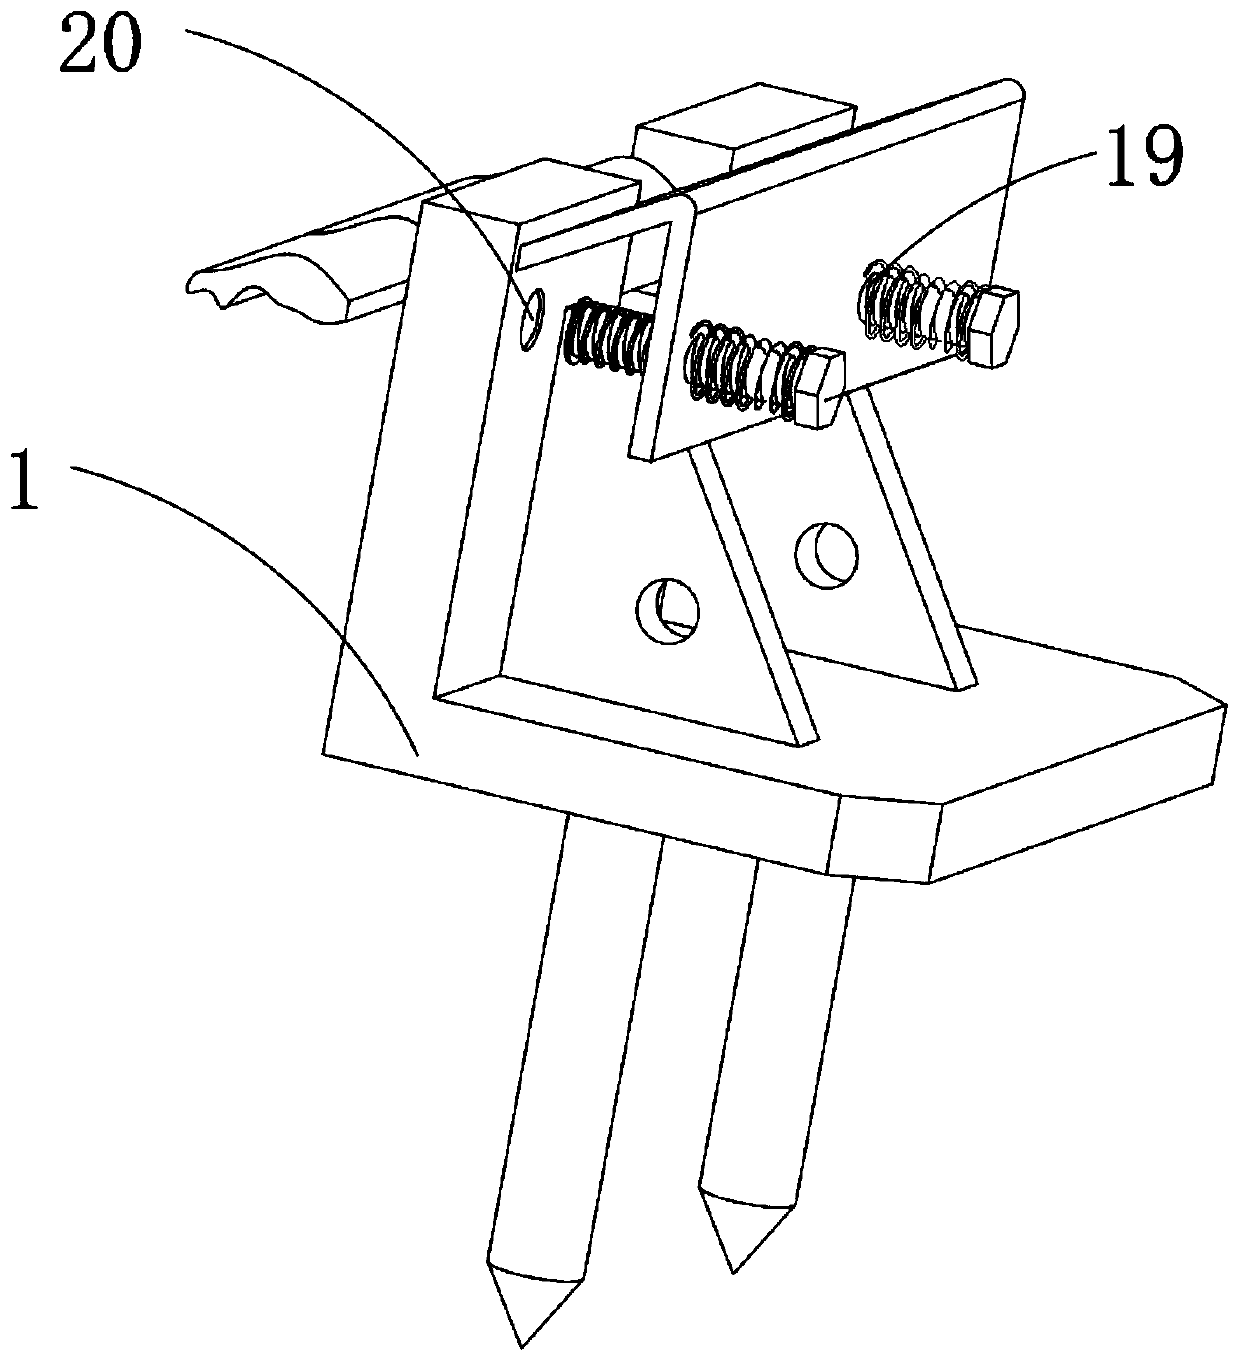 Buckling limiting device based on rail base plate